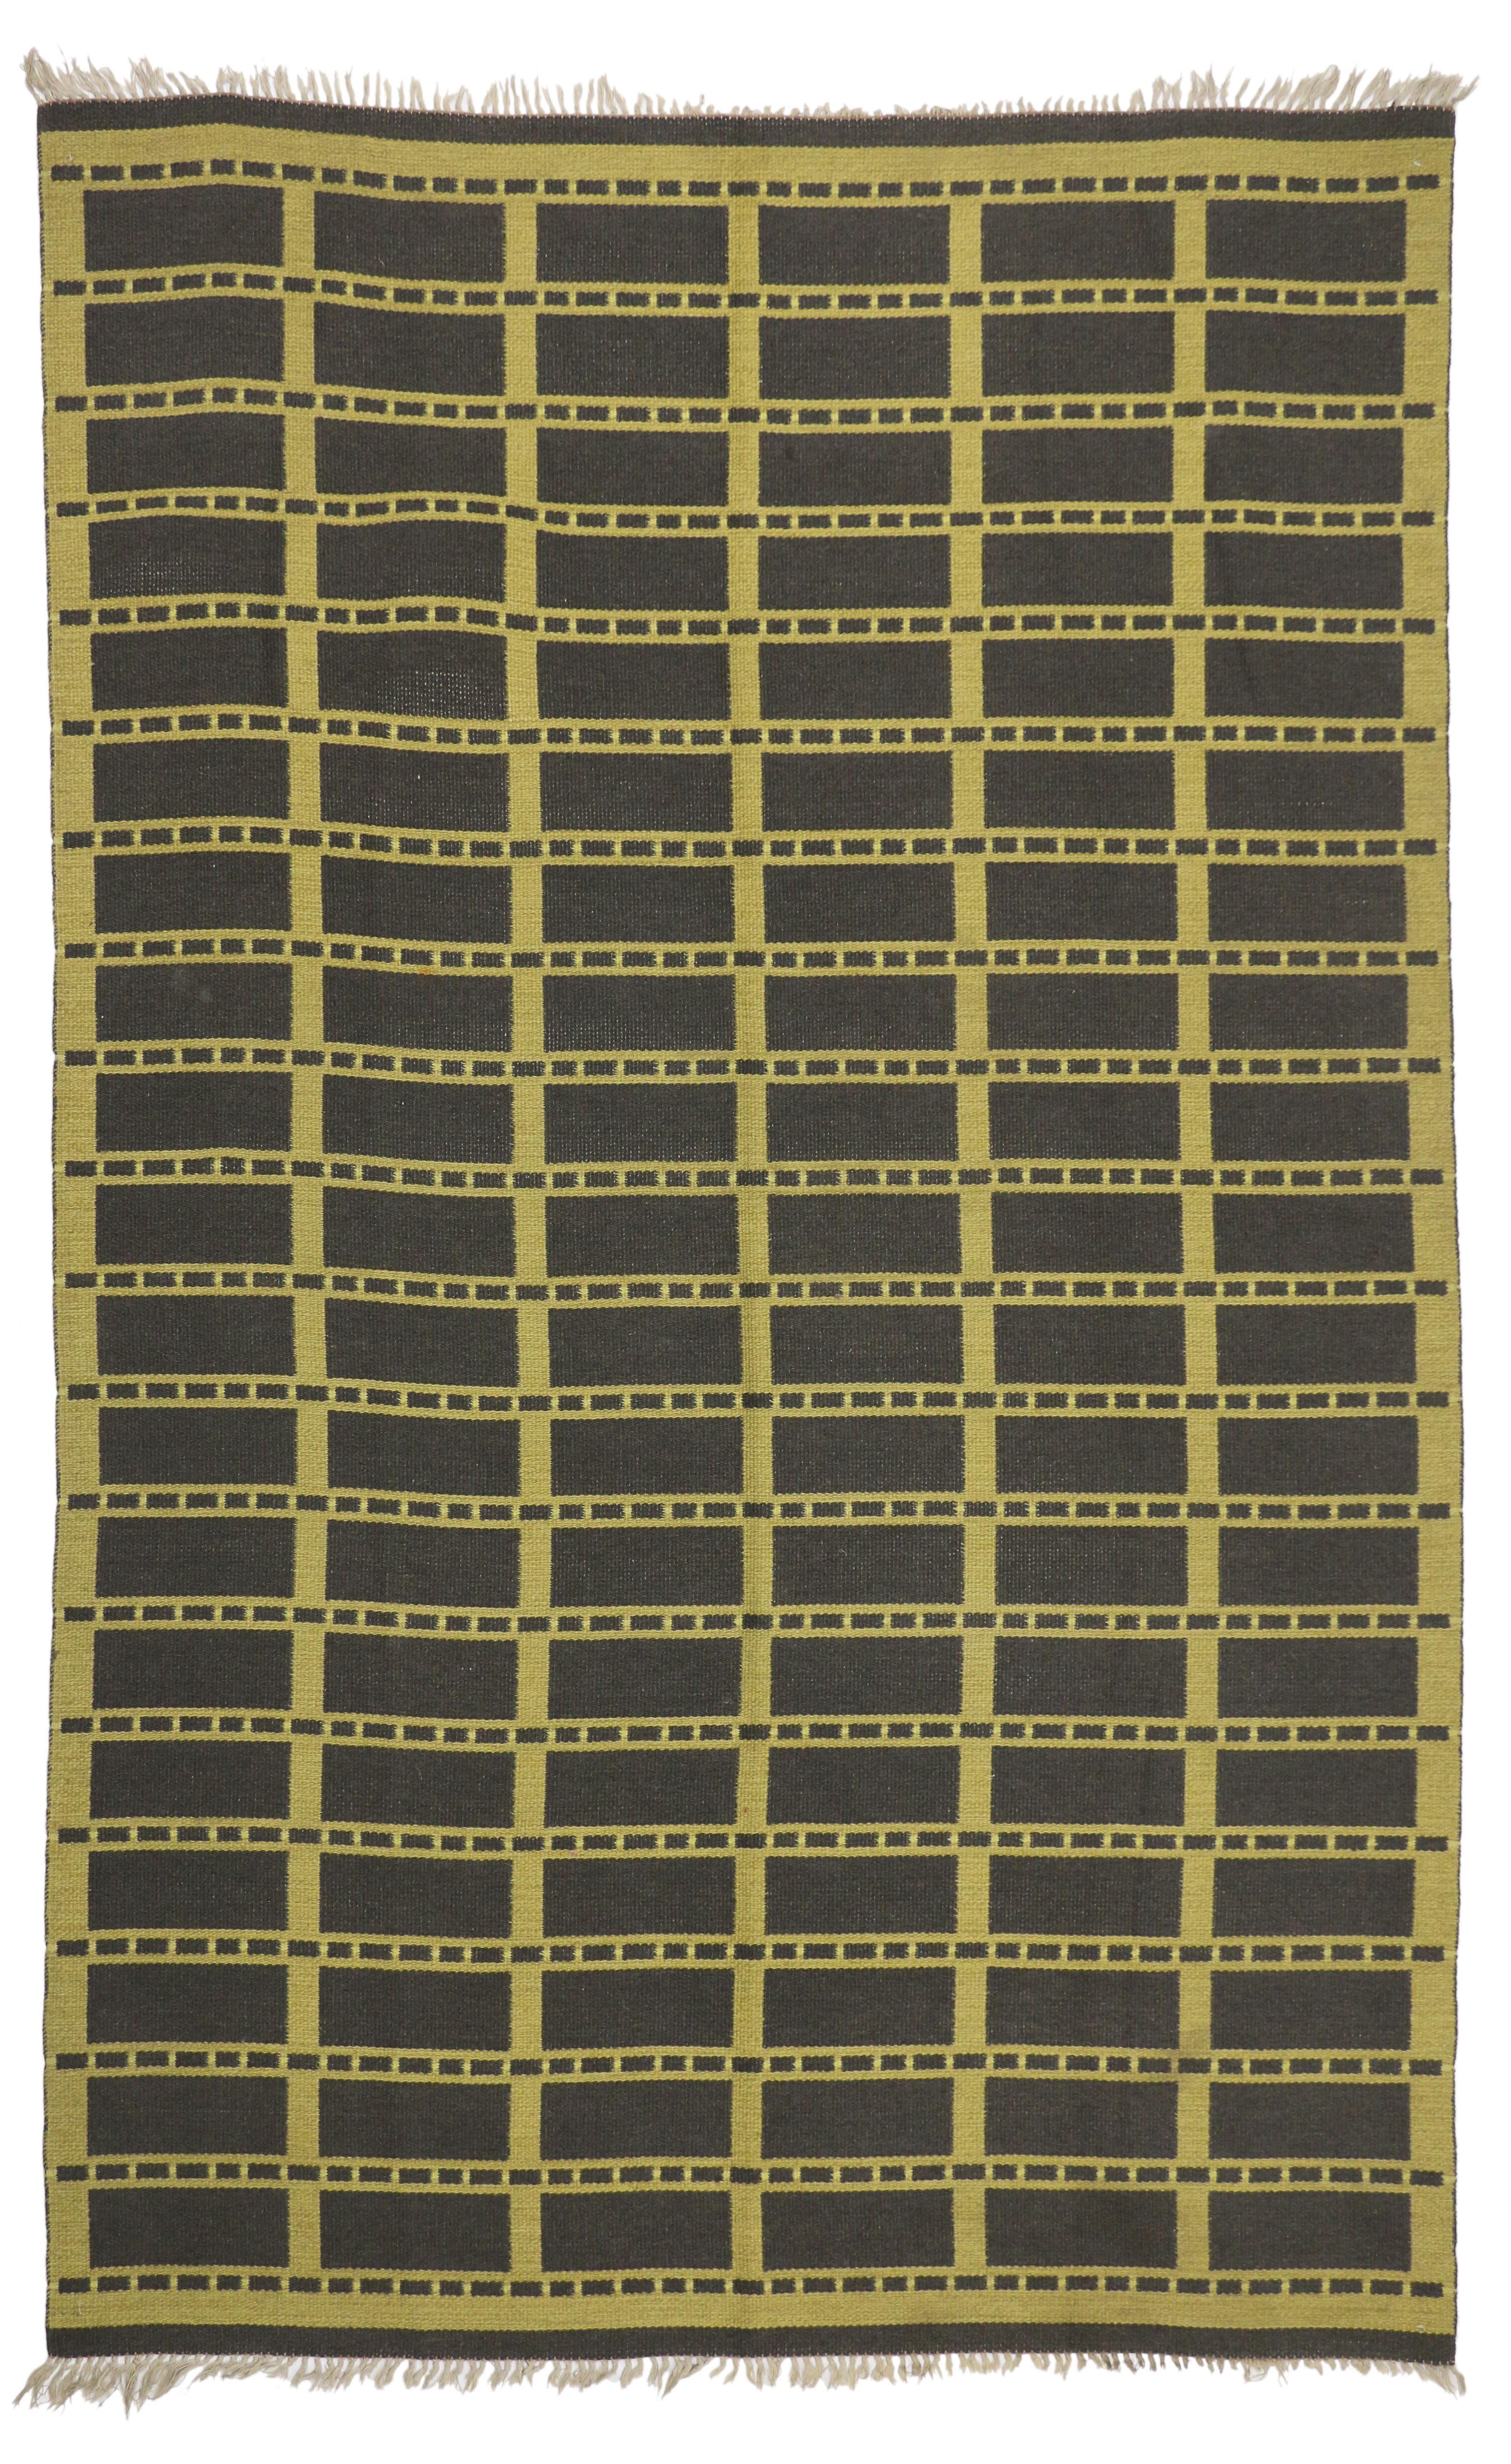 77039, reversible vintage Swedish Kilim rug with Geometric print and Scandinavian Modern style - Röllakan flat-weave rug. This handwoven wool vintage Swedish Kilim rug with Scandinavian Modern style features a geometric pattern and compartmental